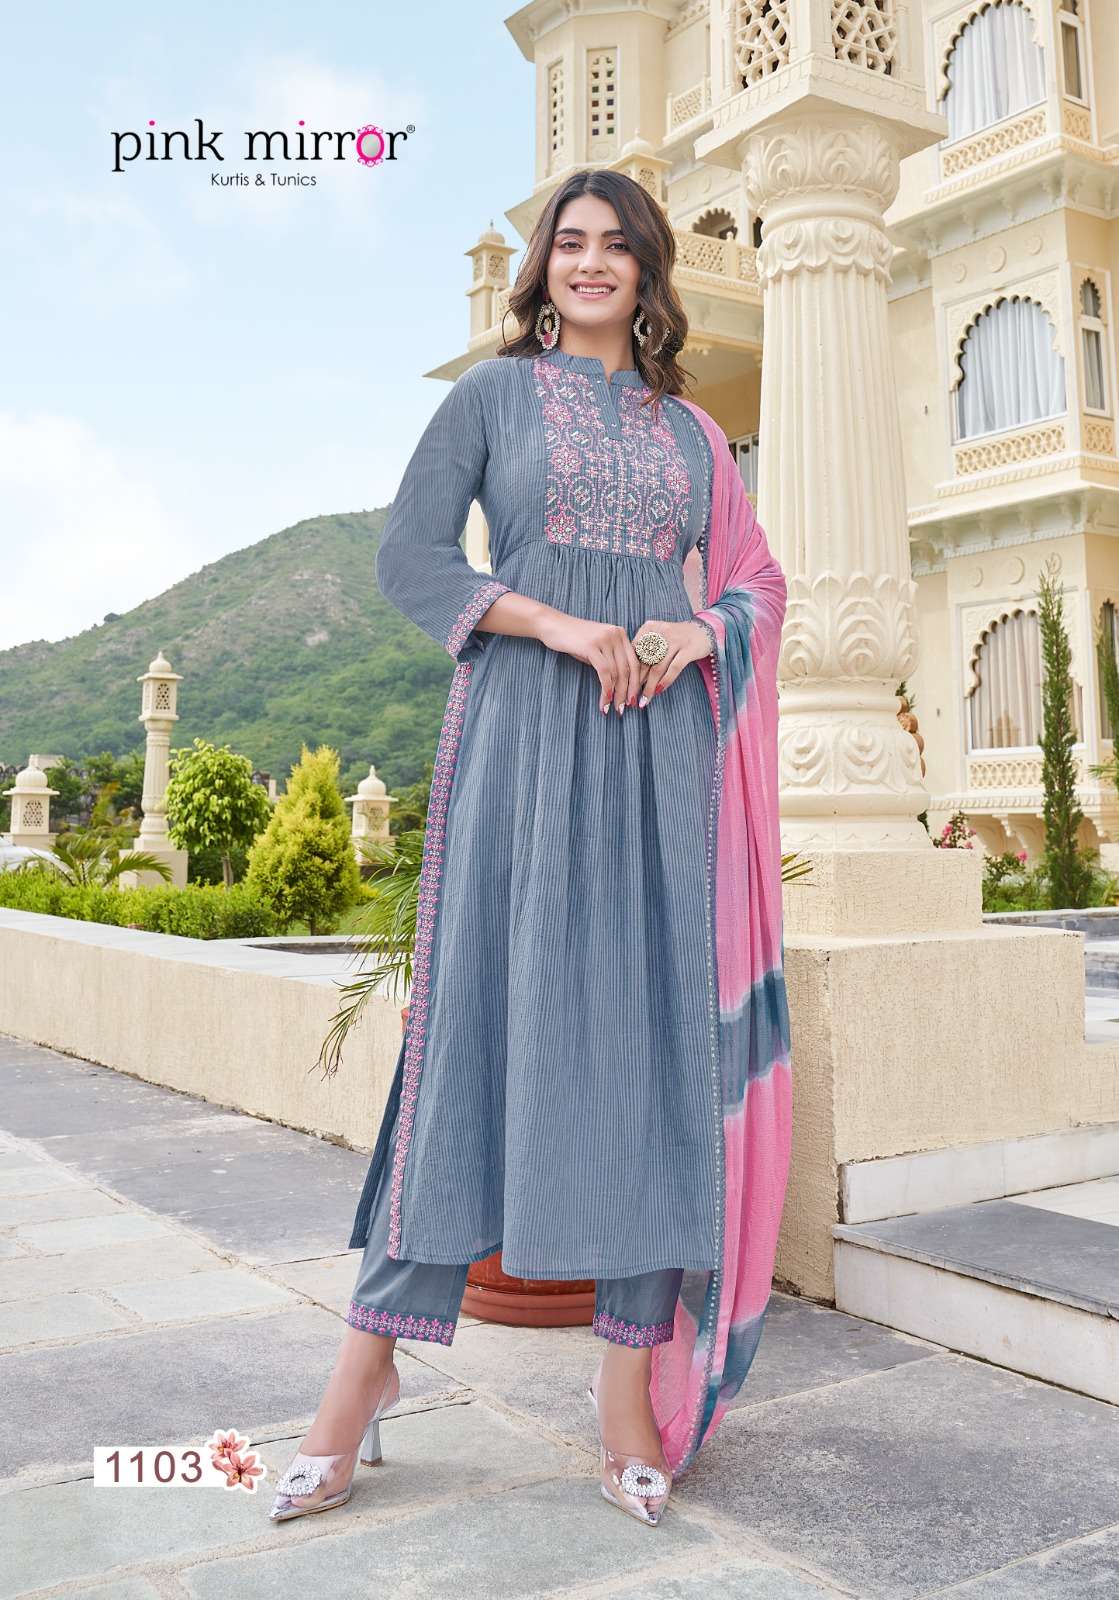 PPT - A Complete Guide To Buying Designer Kurtis For Weddings PowerPoint  Presentation - ID:12283153